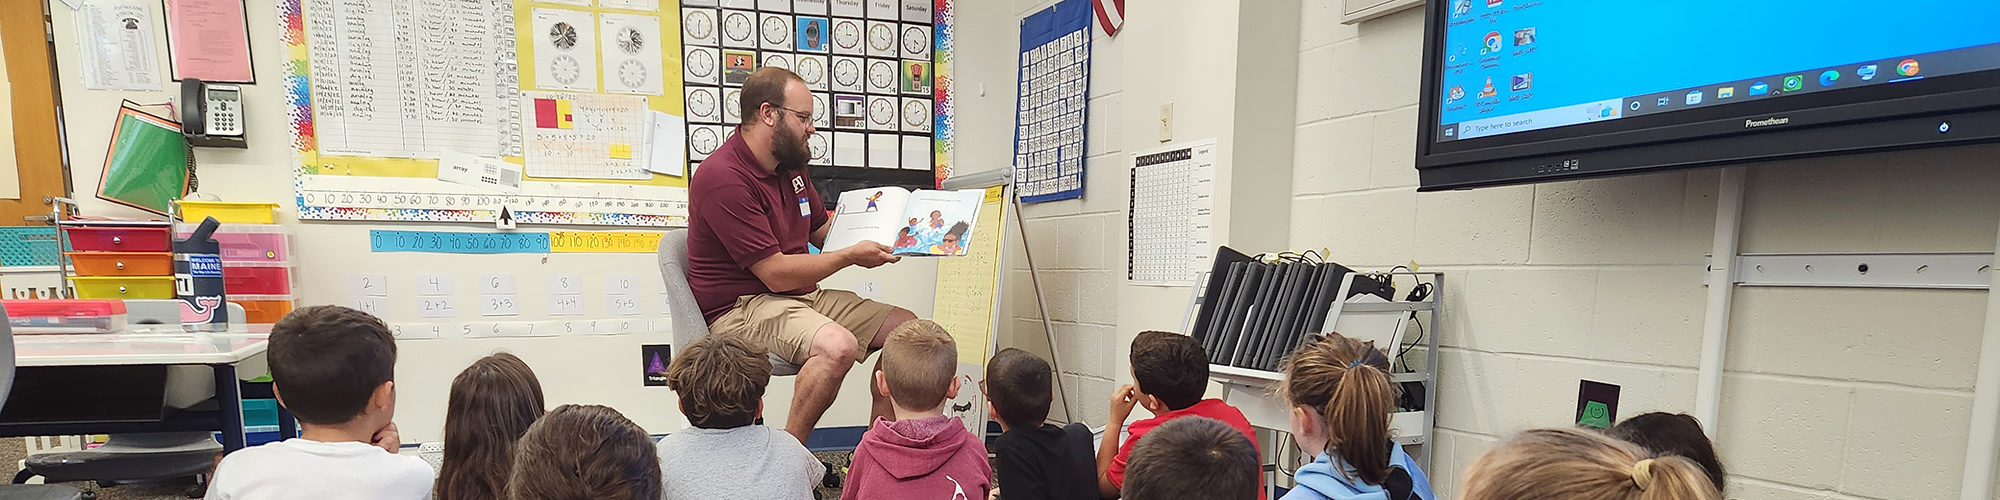 A volunteer reader reading to elementary school students